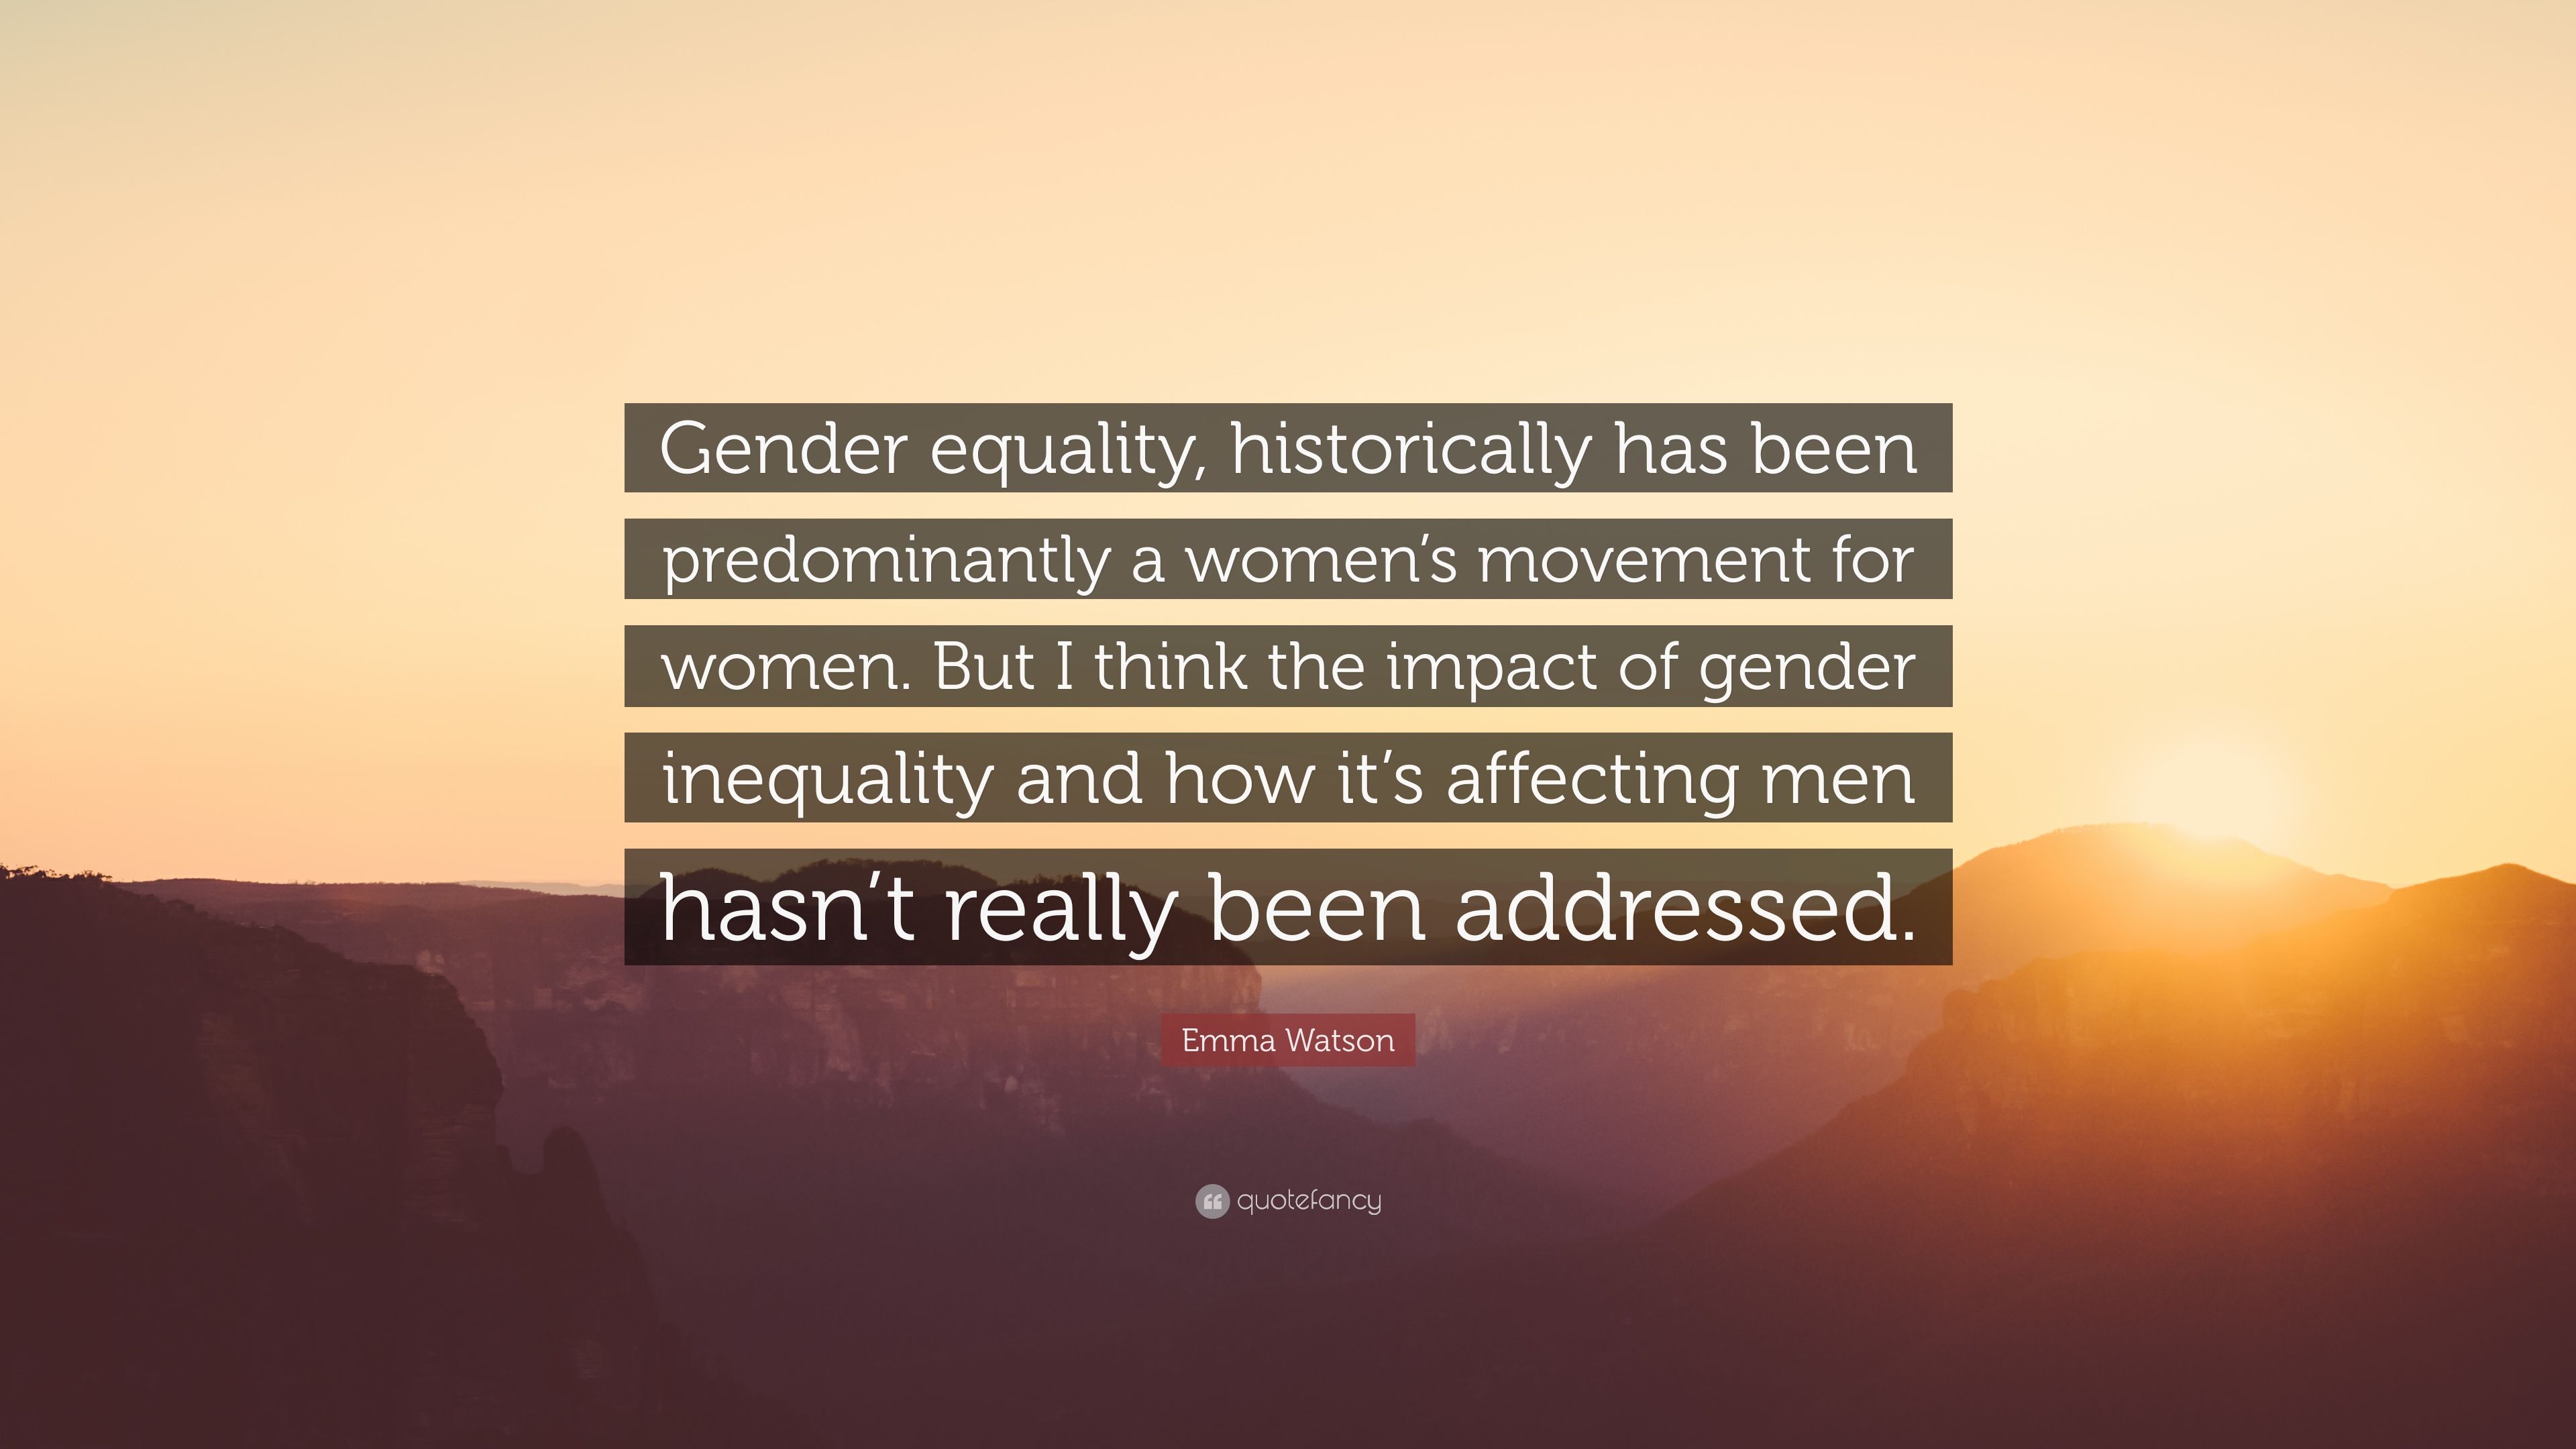 Emma Watson Quote: “Gender equality, historically has been